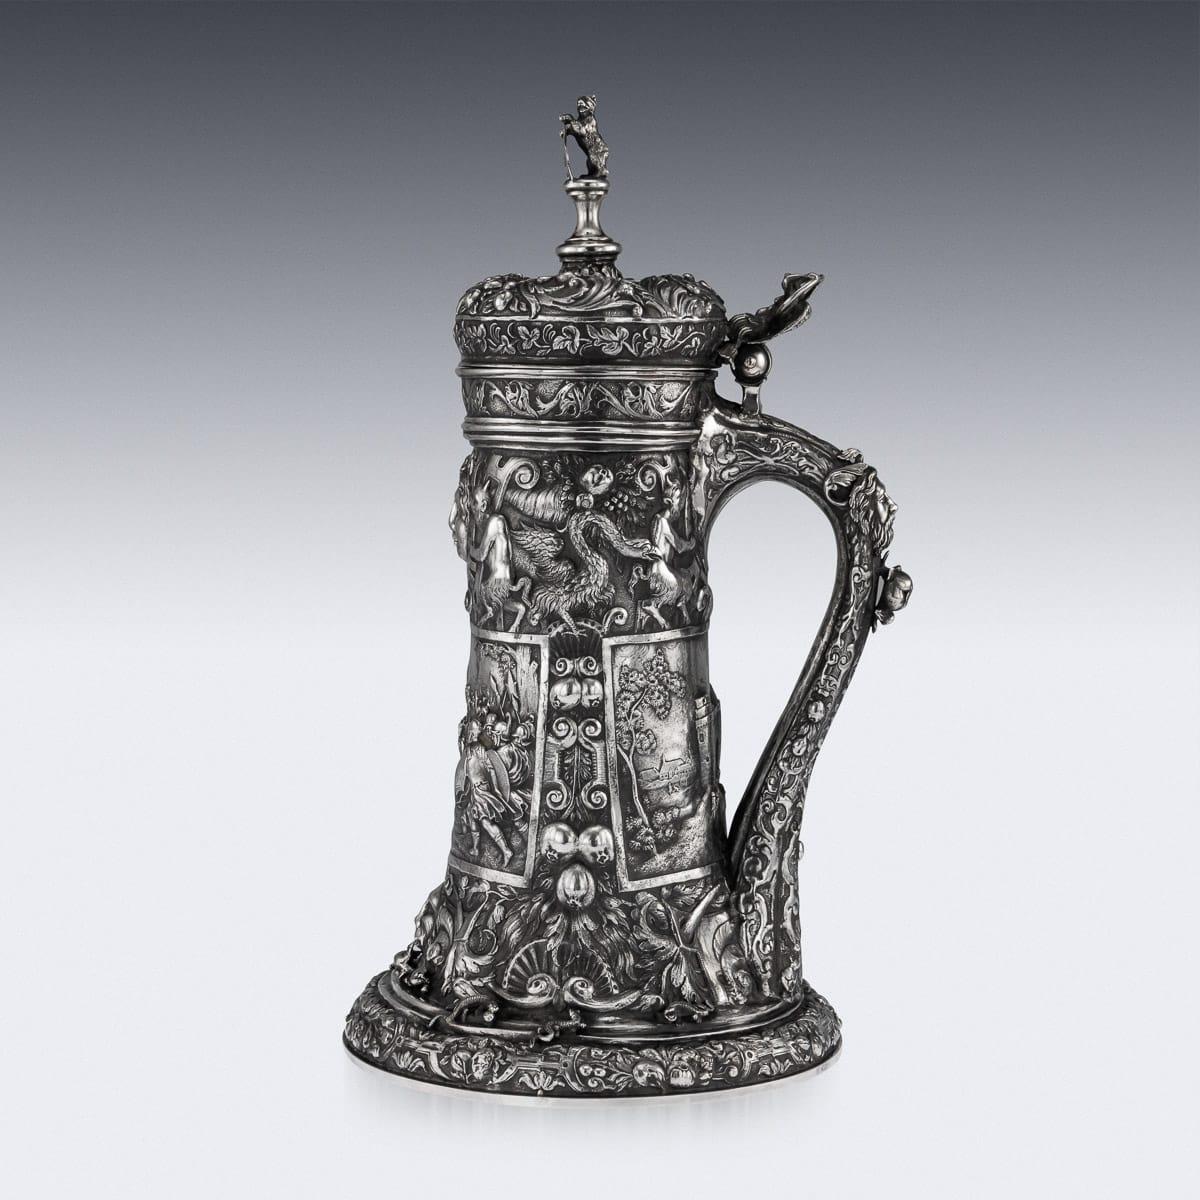 Antique mid-19th century exceptional & impressively large German (Hanau) solid silver lidded tankard, in the style of the early 16th century examples, the front beautifully chased and embossed with a very detailed crowded battle scenes, reverse